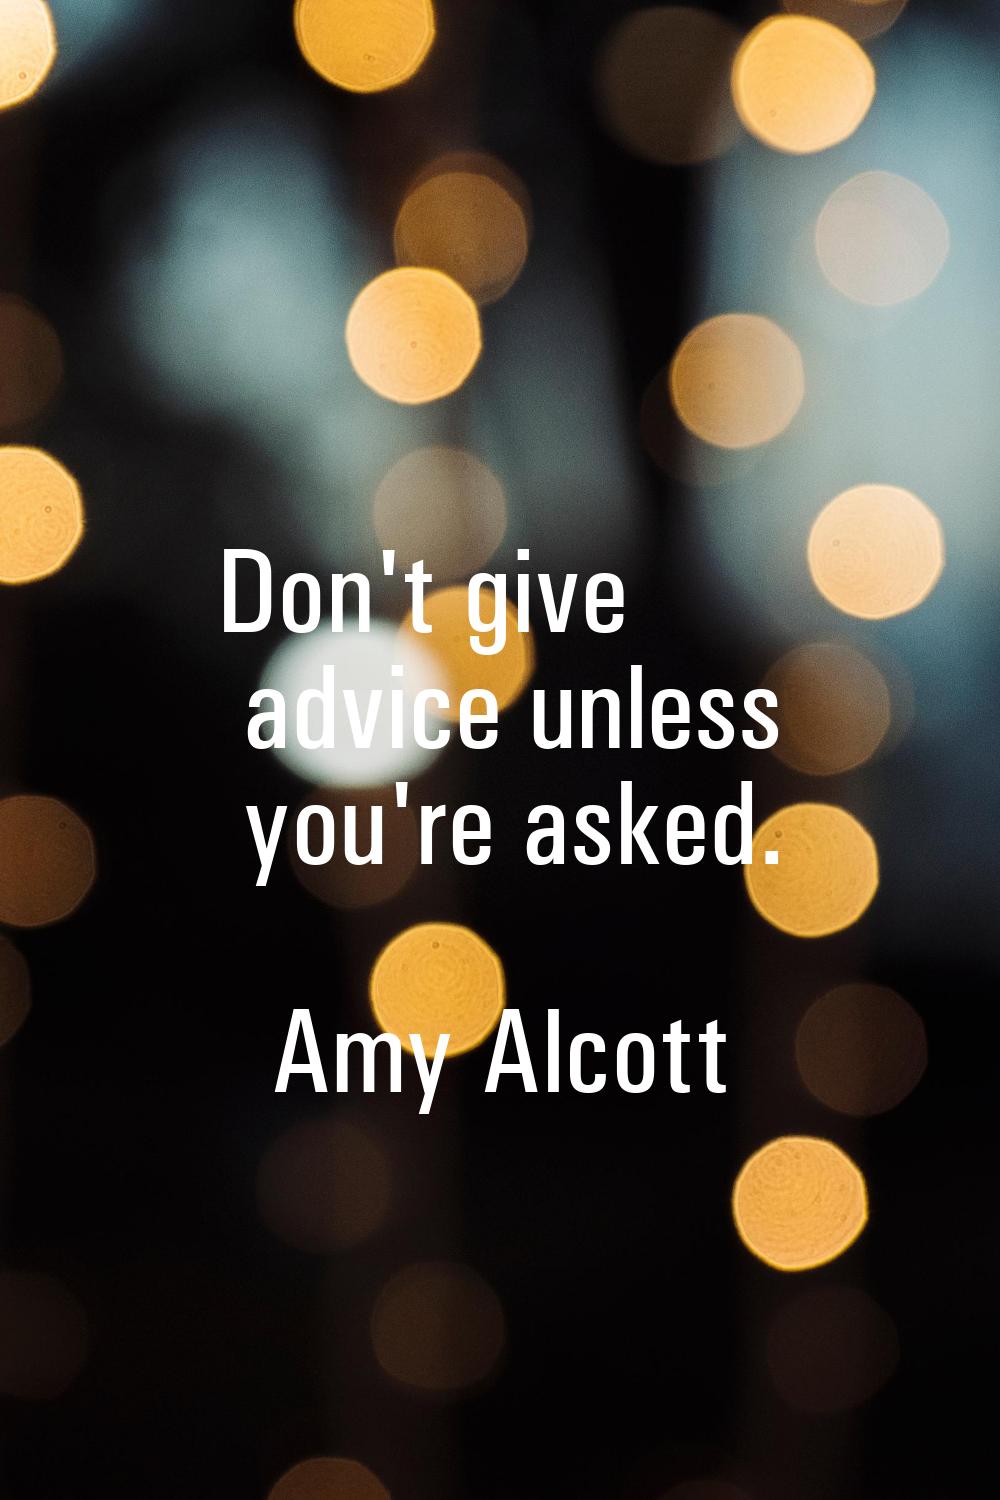 Don't give advice unless you're asked.